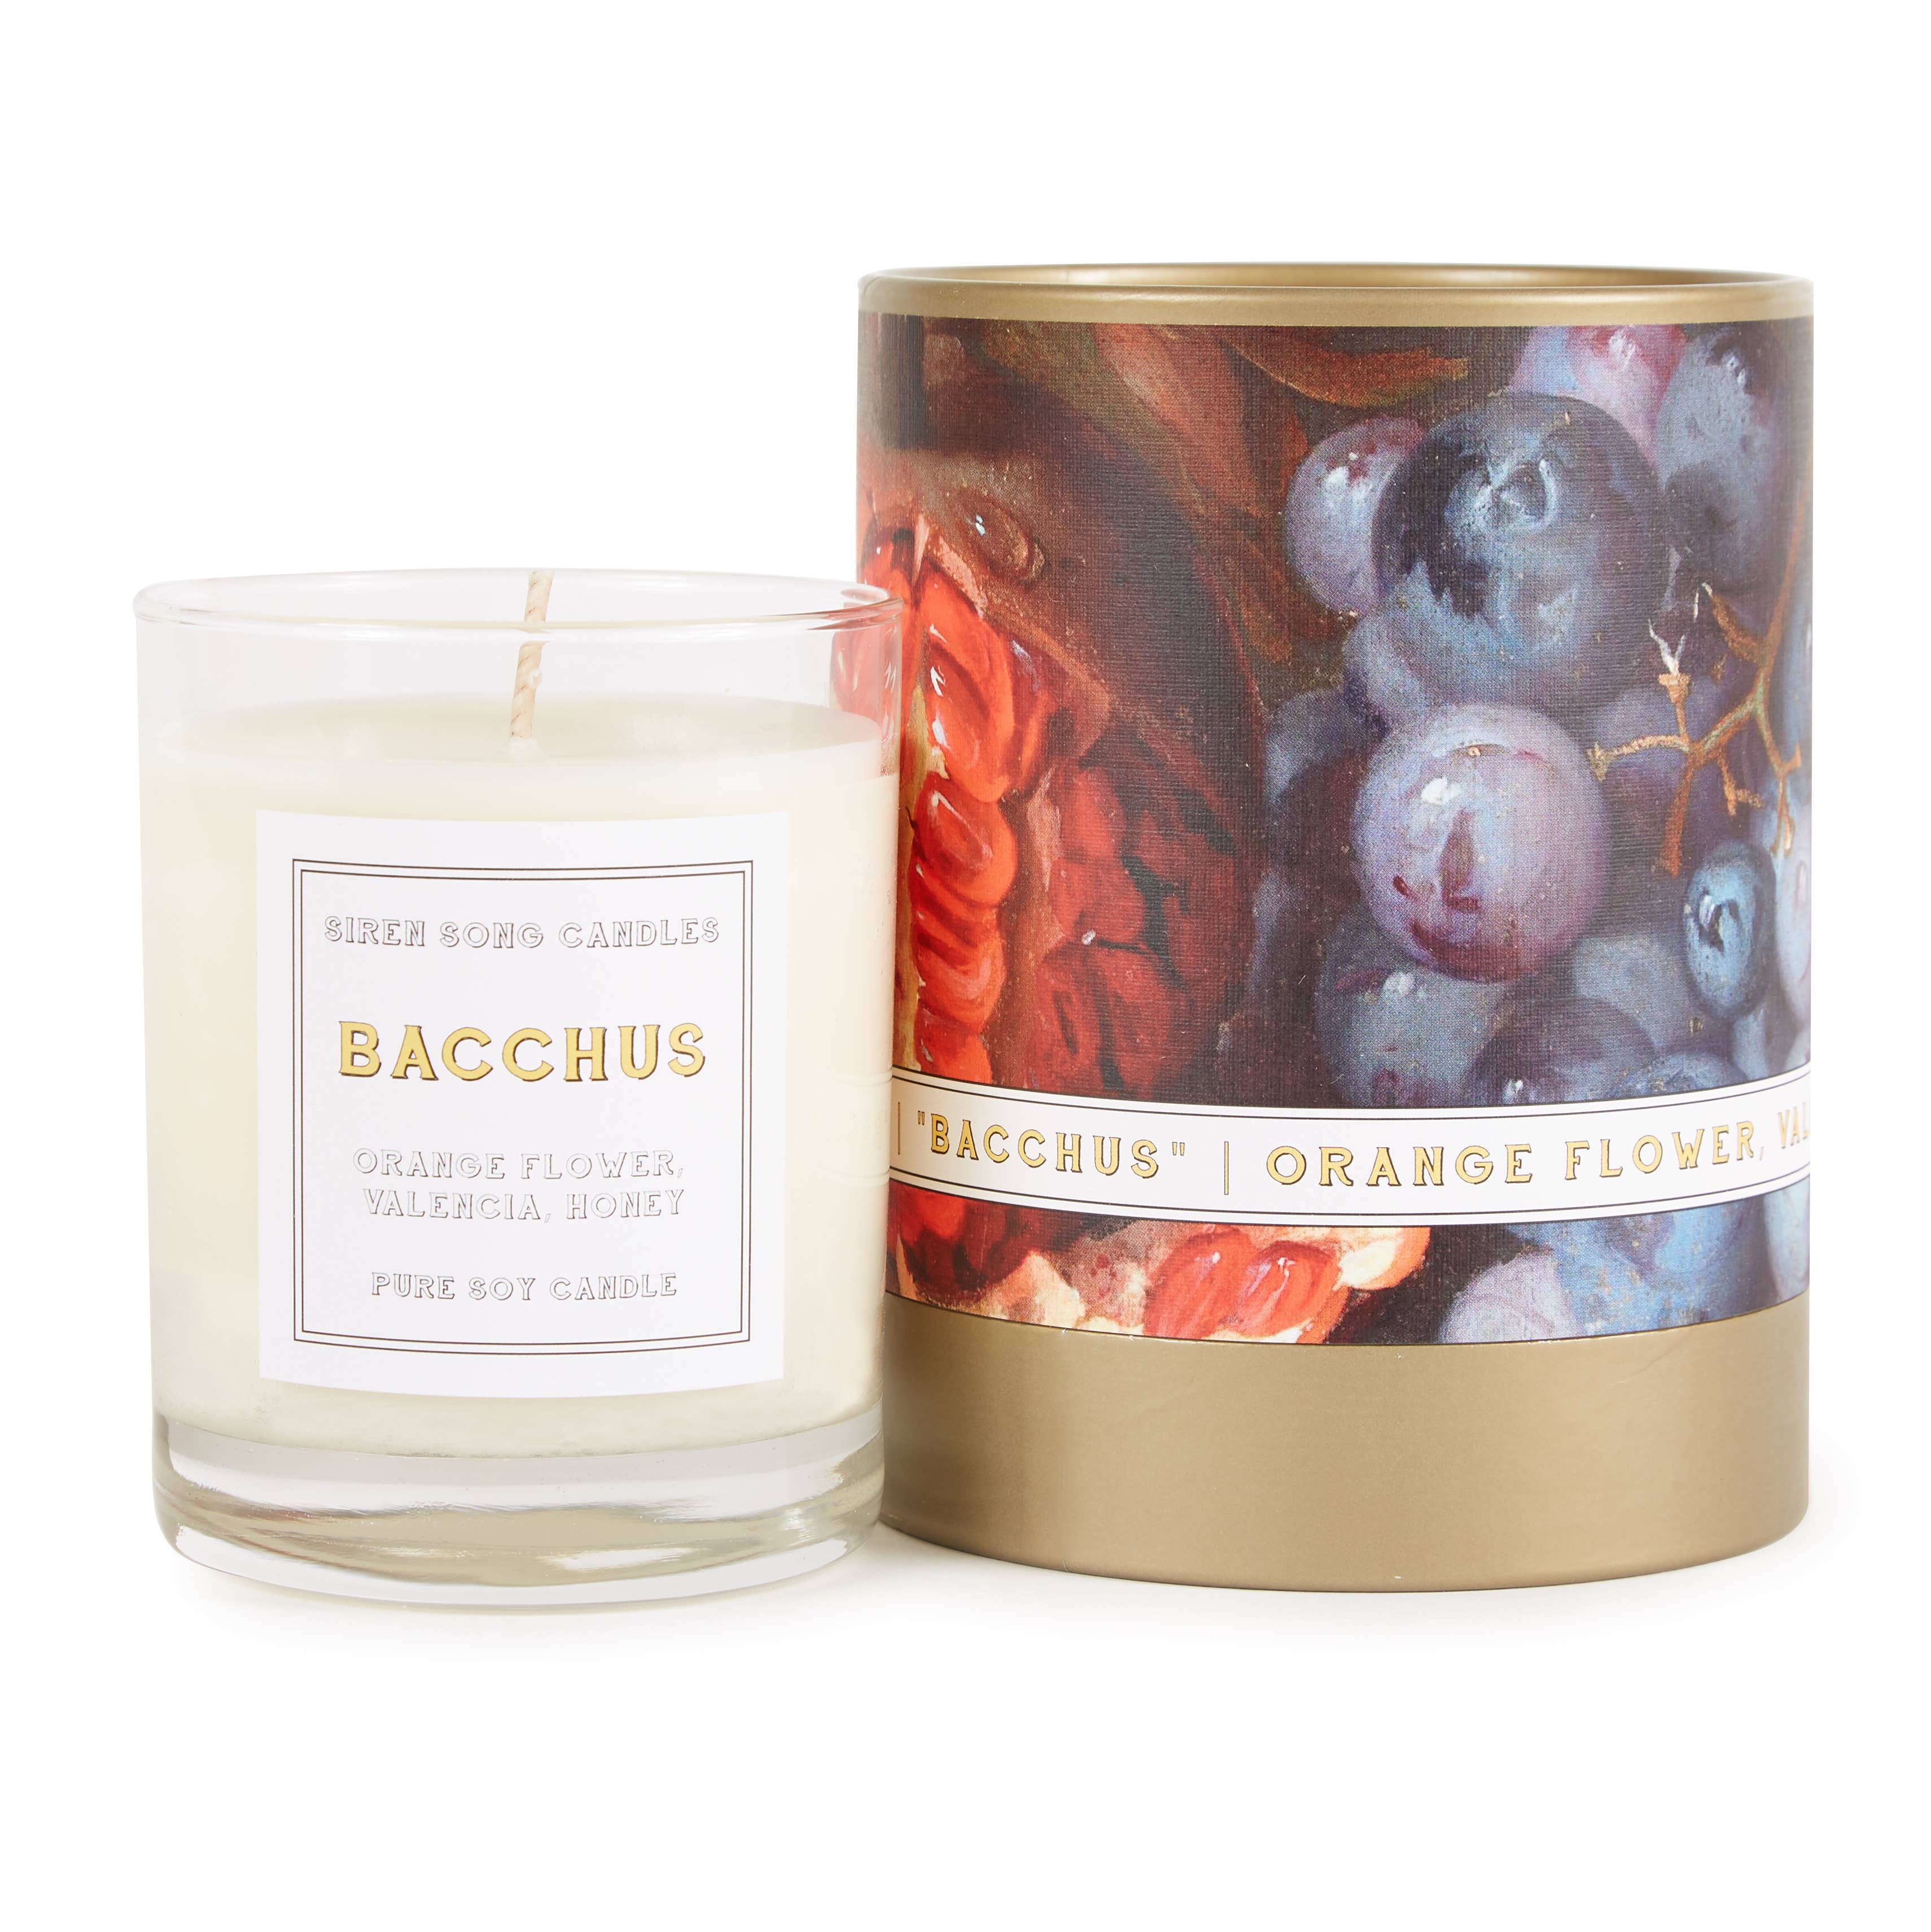 BACCHUS SOY CANDLE